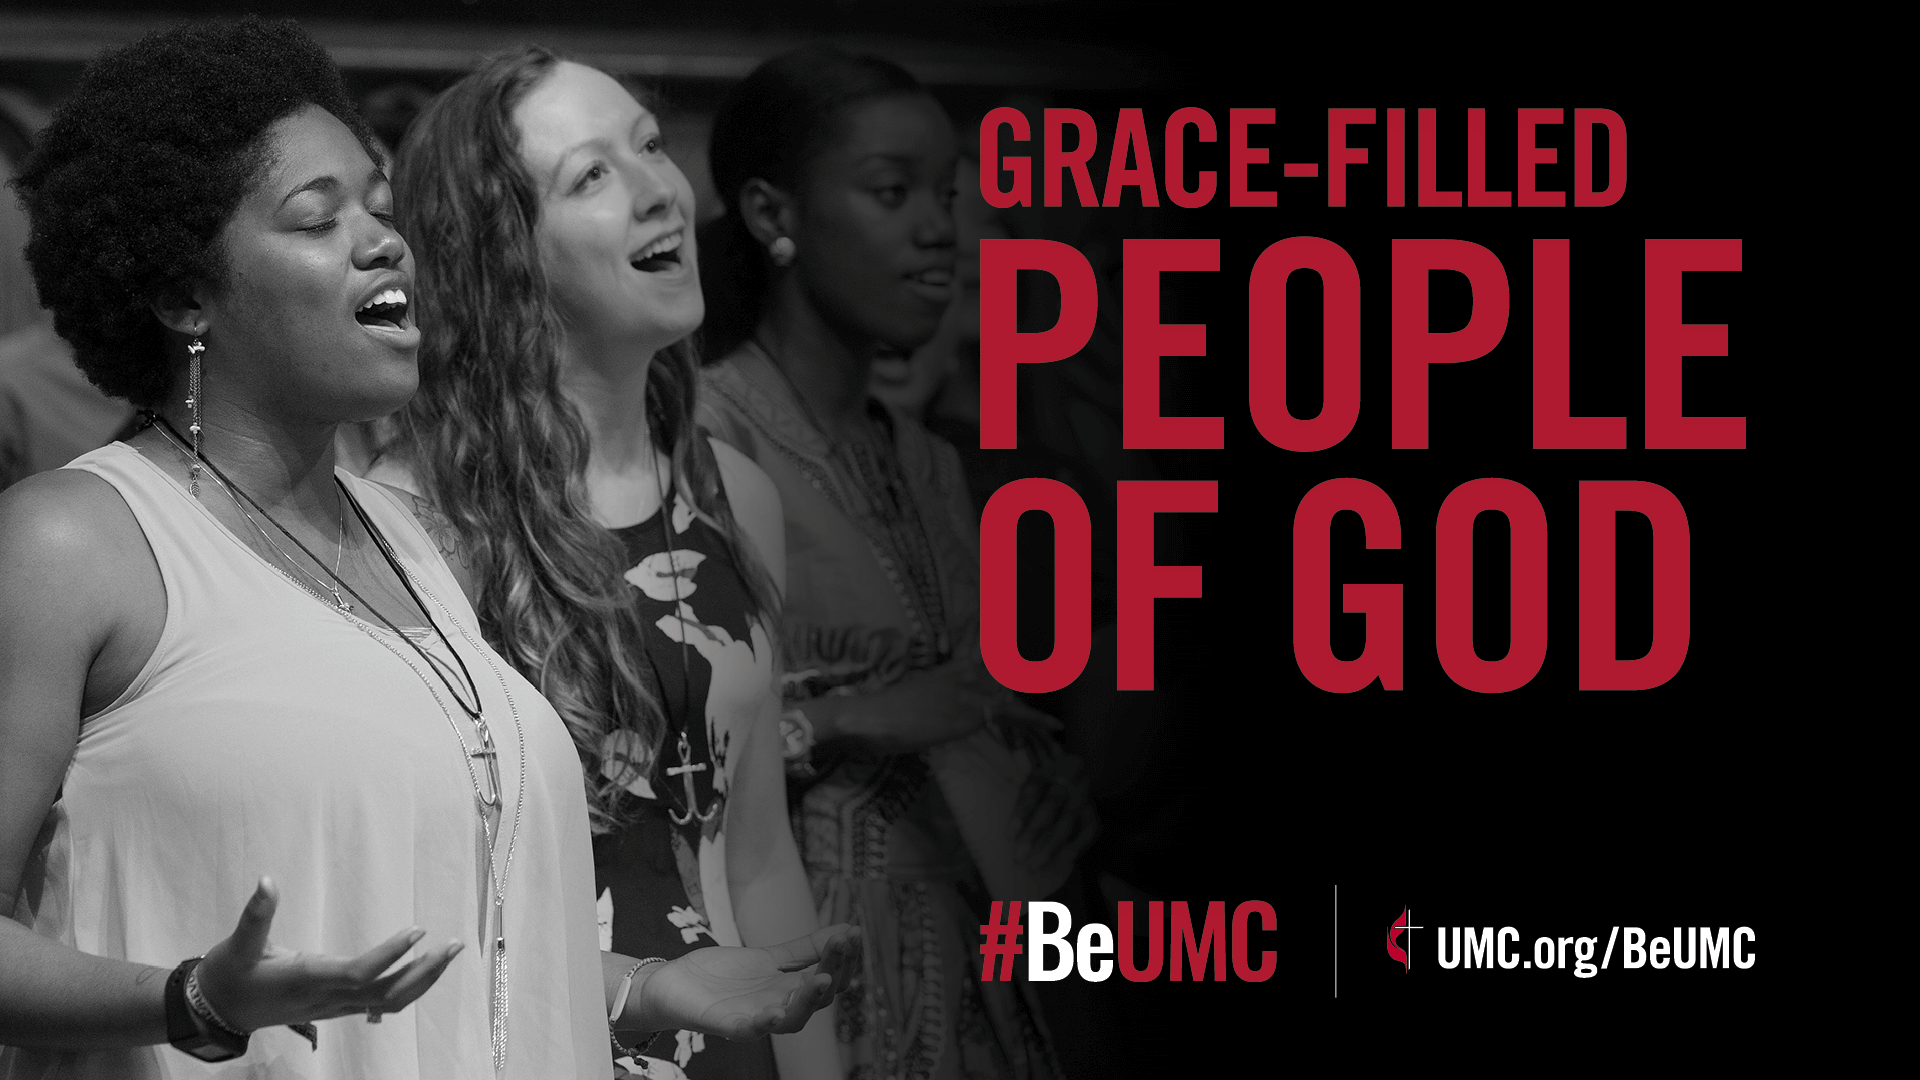 The #BeUMC campaign reminds us of who we are at our best. As people of God called The United Methodist Church, we’re faithful followers of Jesus seeking to make the world a better place. Grace-filled (praise), worship graphic.